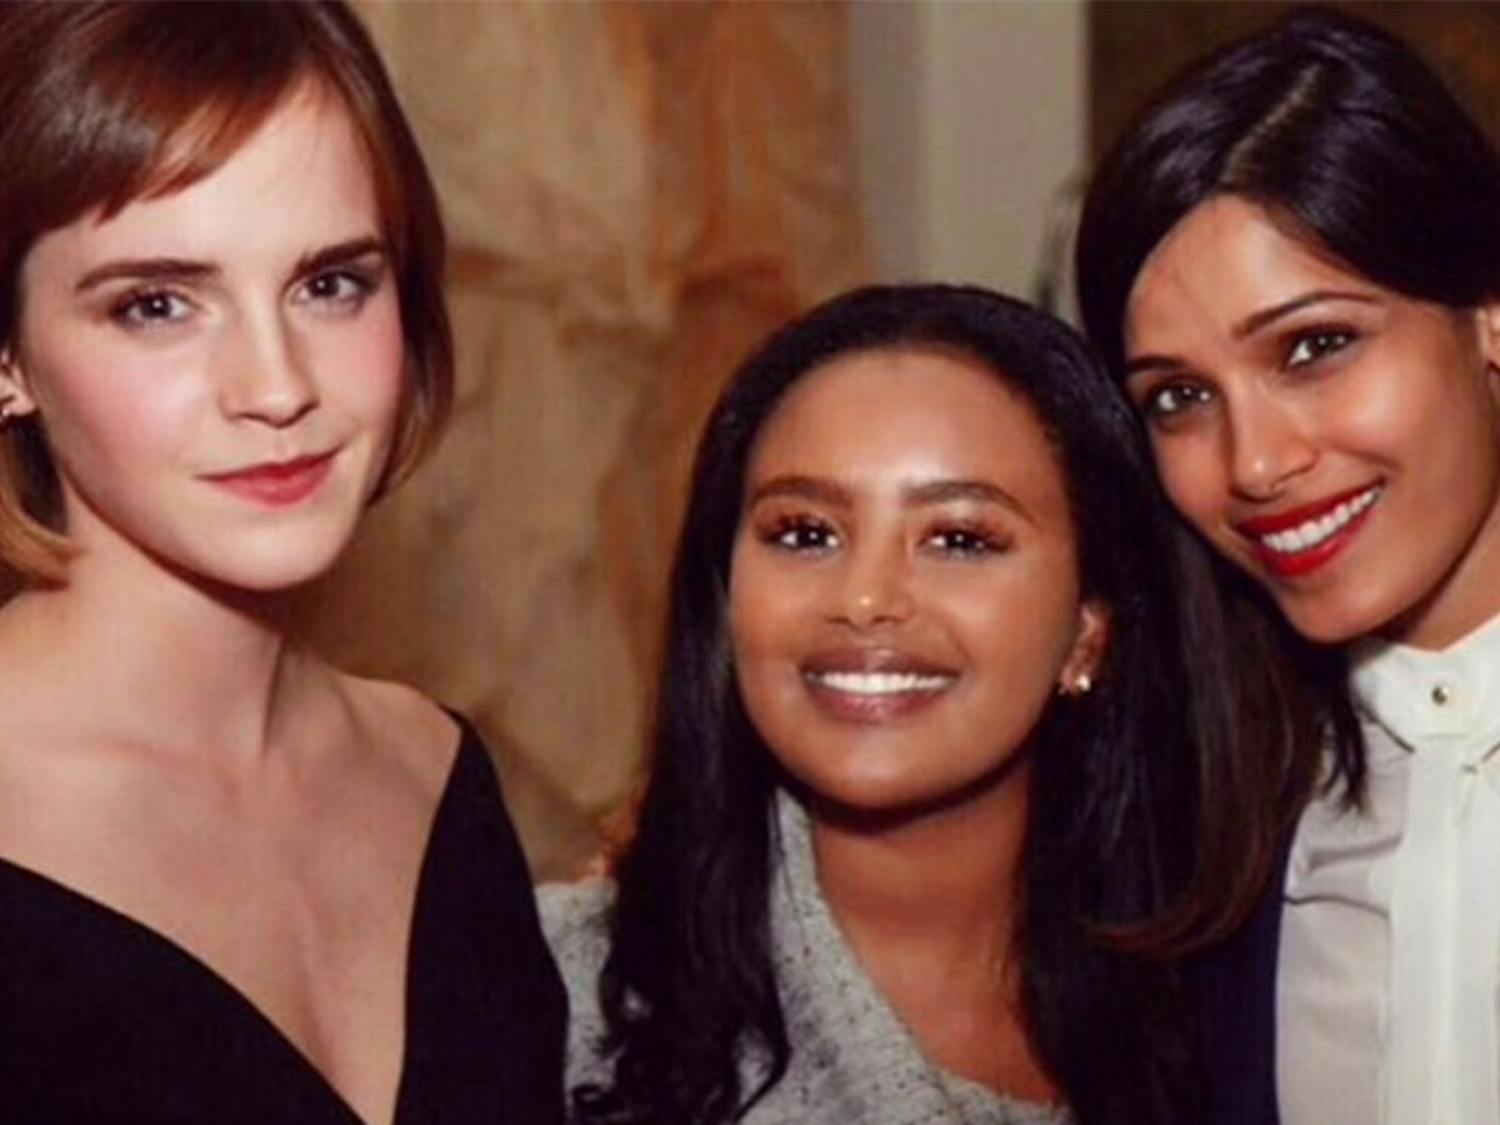 Freshman Hannah Godefa (middle), who founded her own nonprofit, attended the World Economic Forum last week in Switzerland and met actresses Emma Watson and Freida Pinto (also pictured).